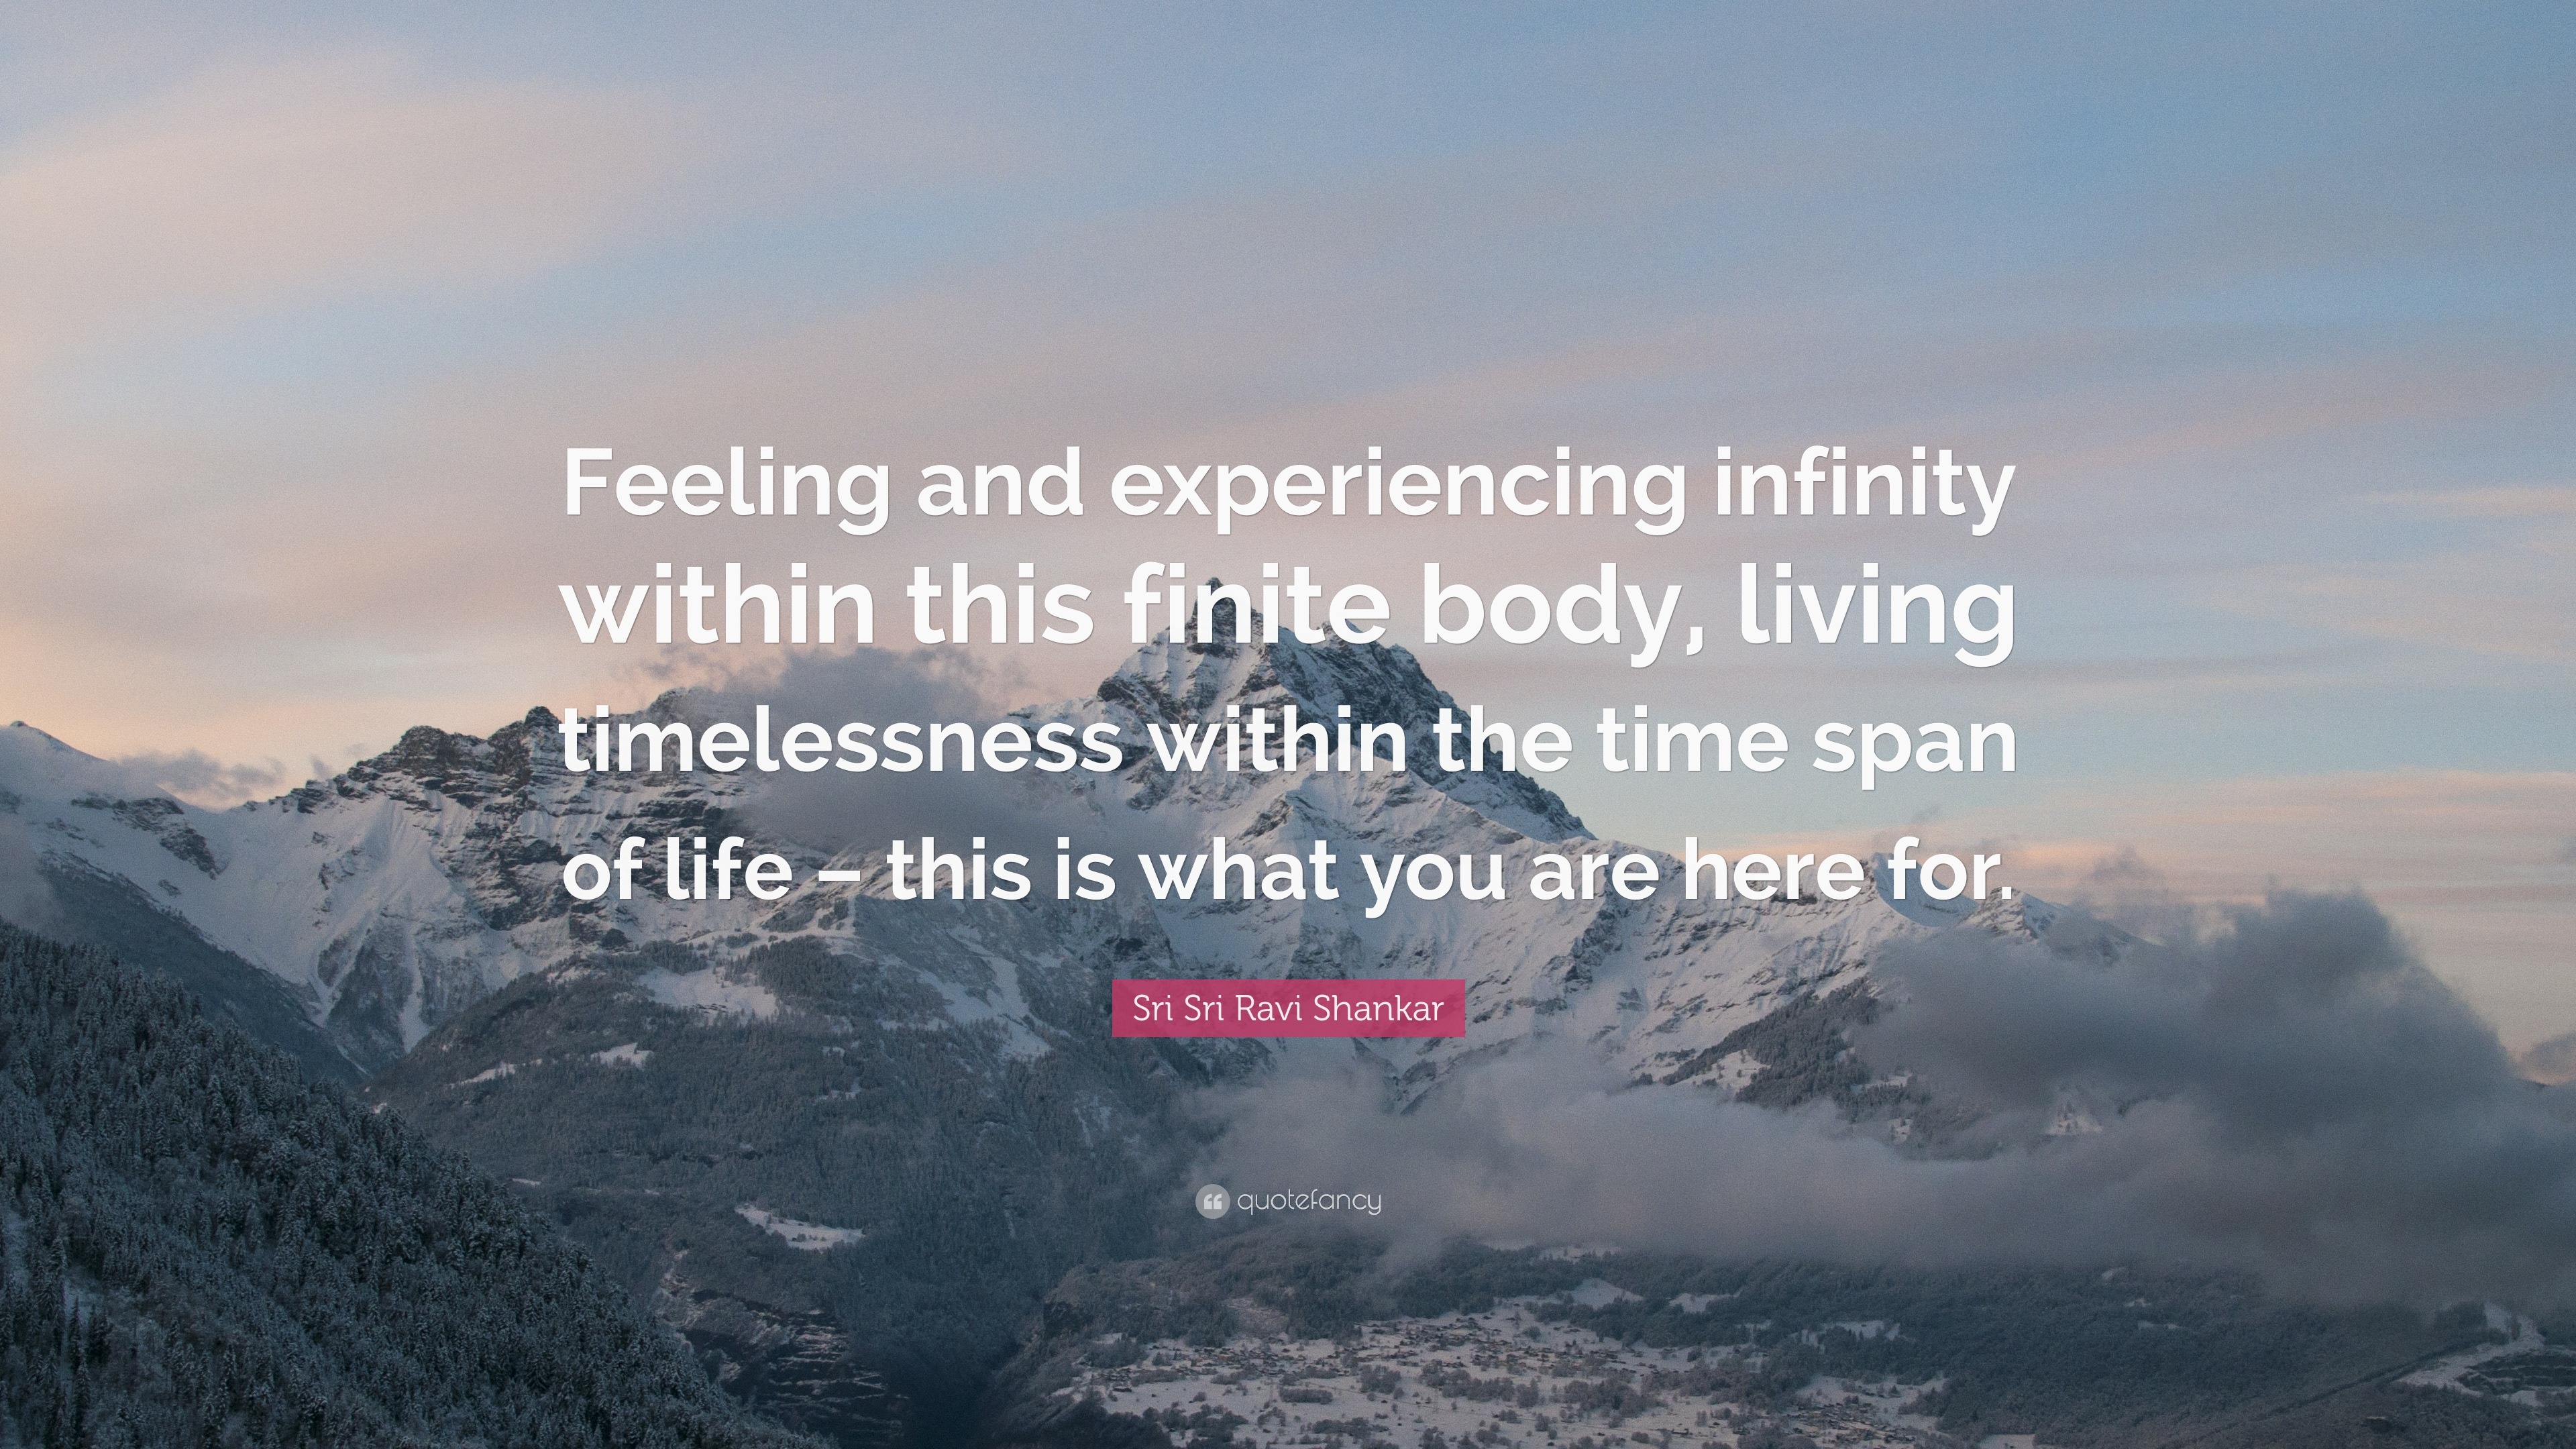 Sri Sri Ravi Shankar Quote: “Feeling and experiencing infinity within ...